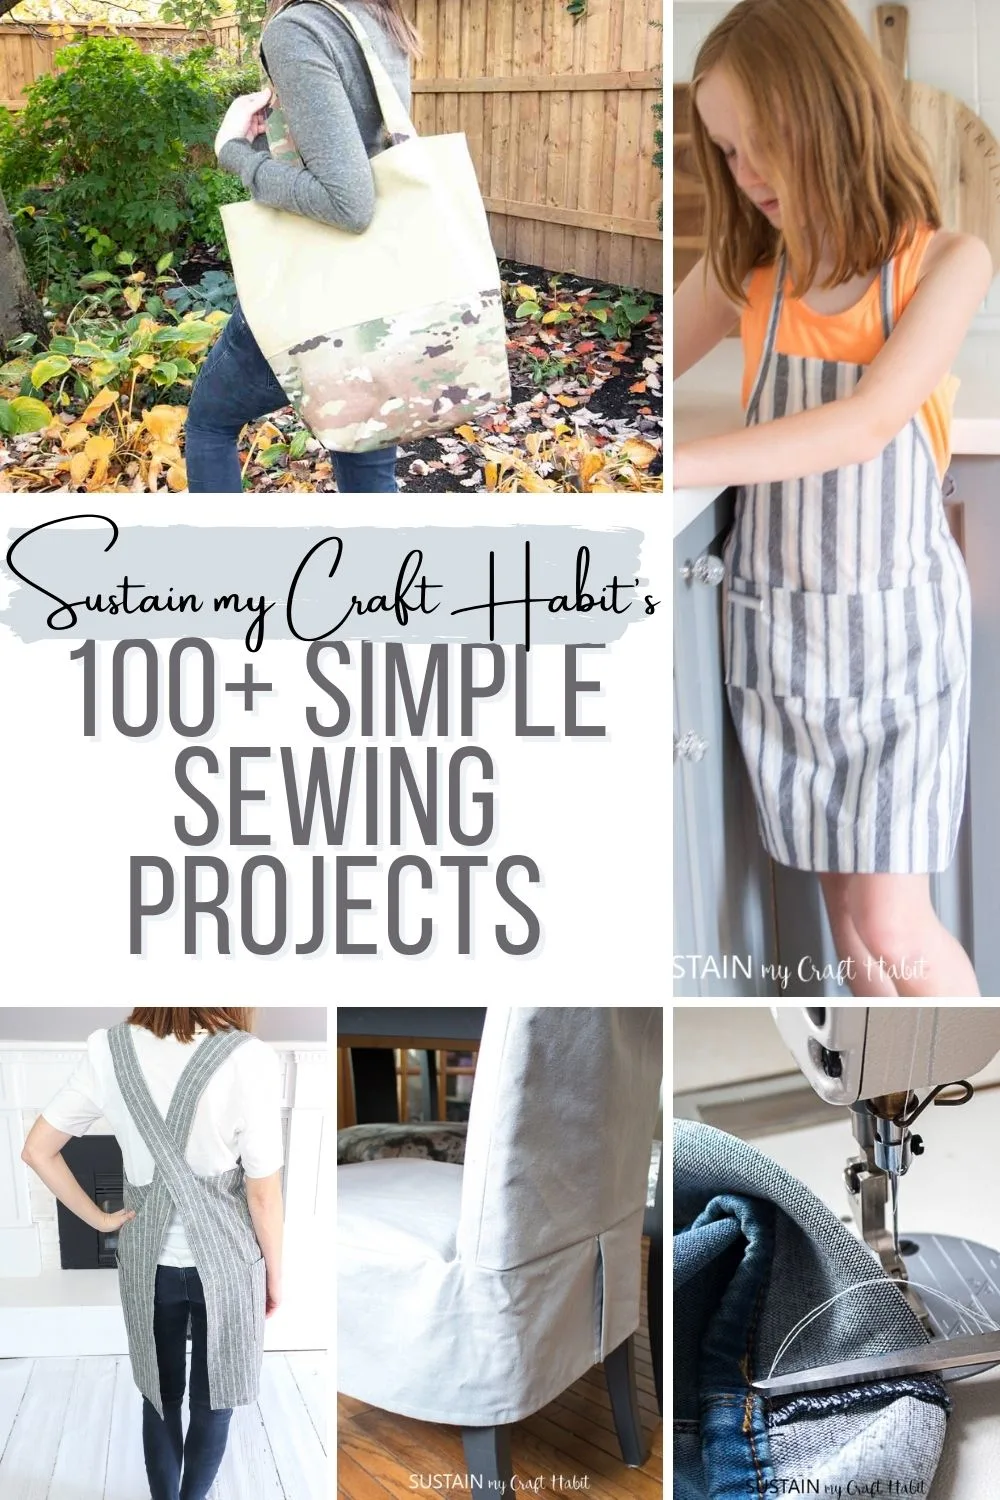 Sewing Guide Archives - The Sewing Guide